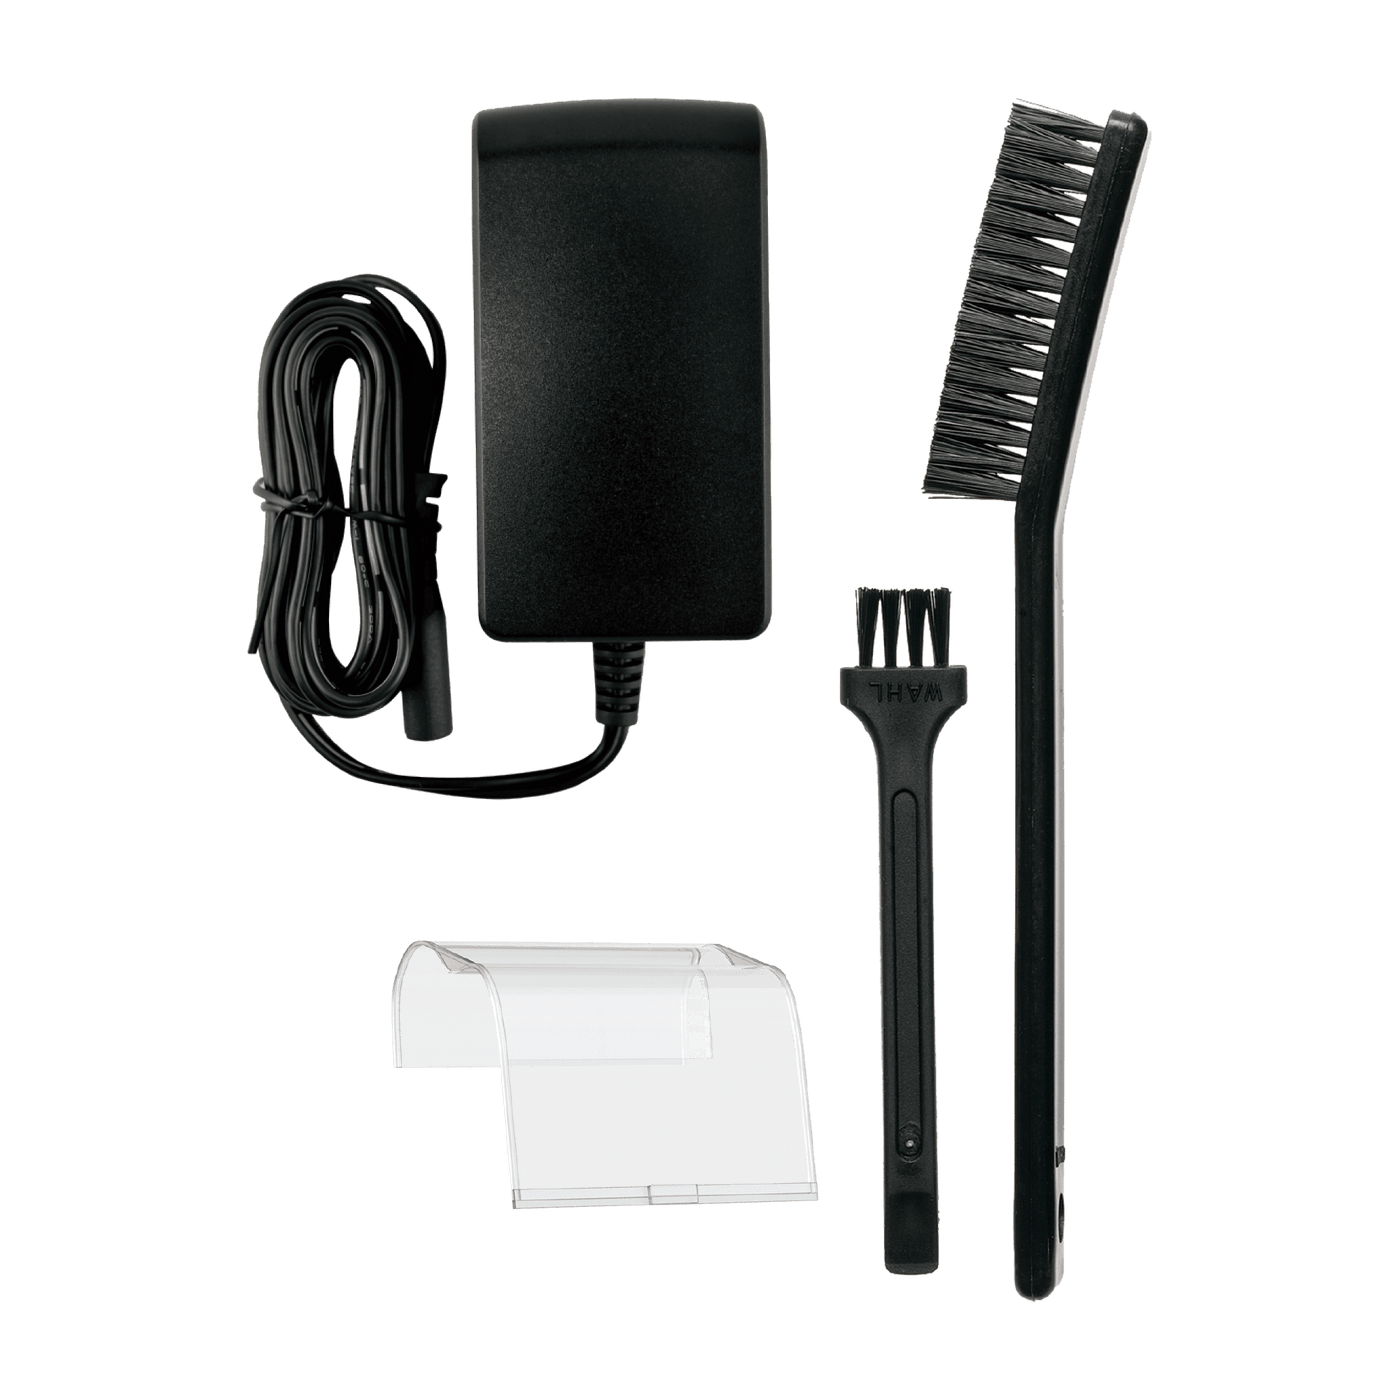 wahl finale price